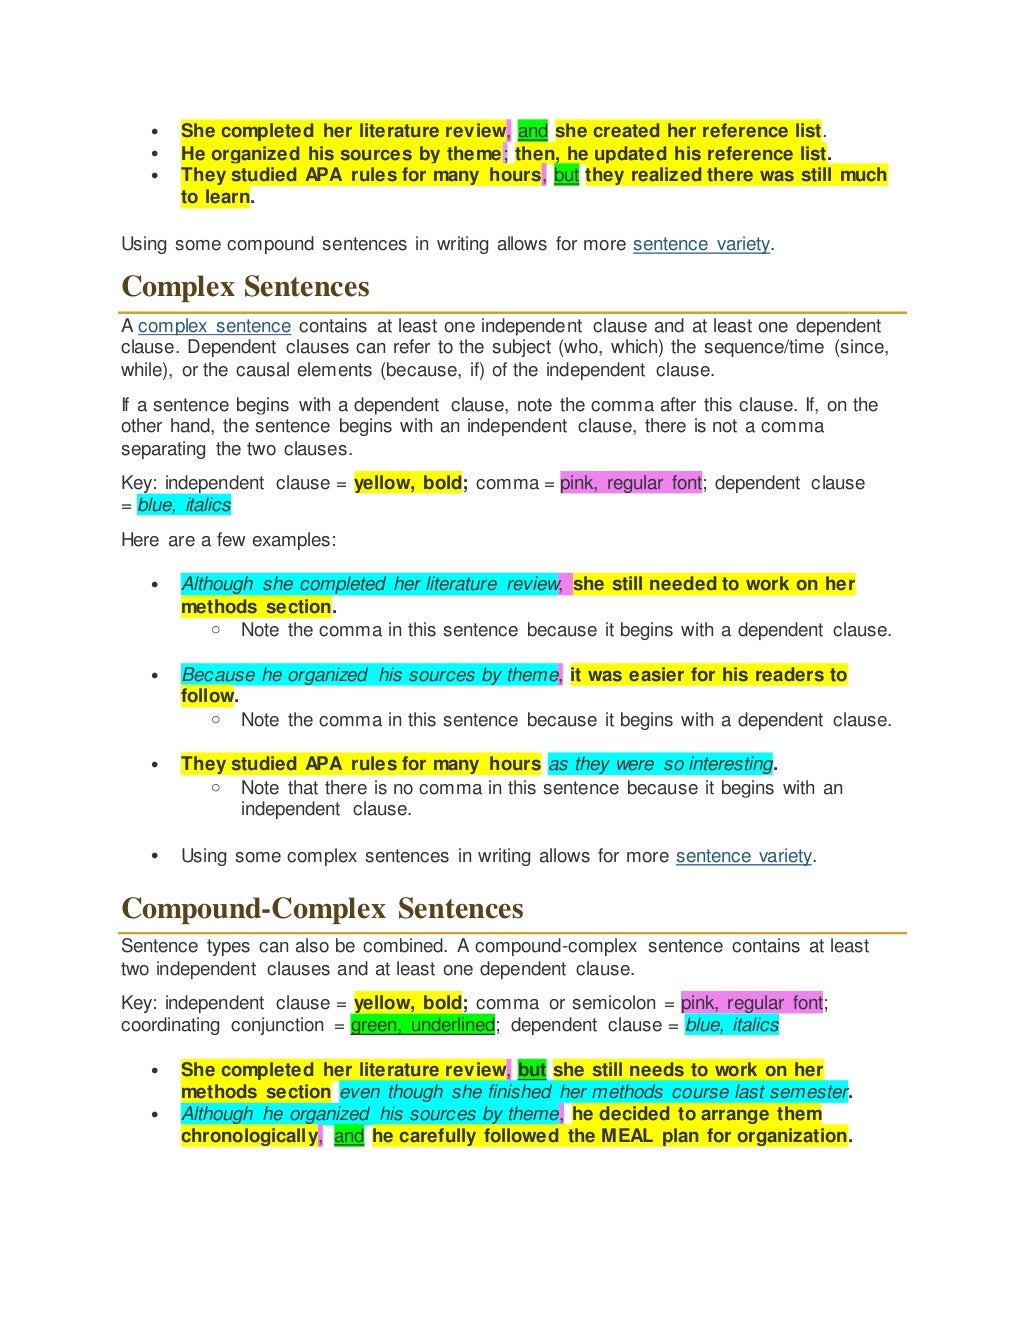 definitions-and-examples-of-basic-sentence-elements